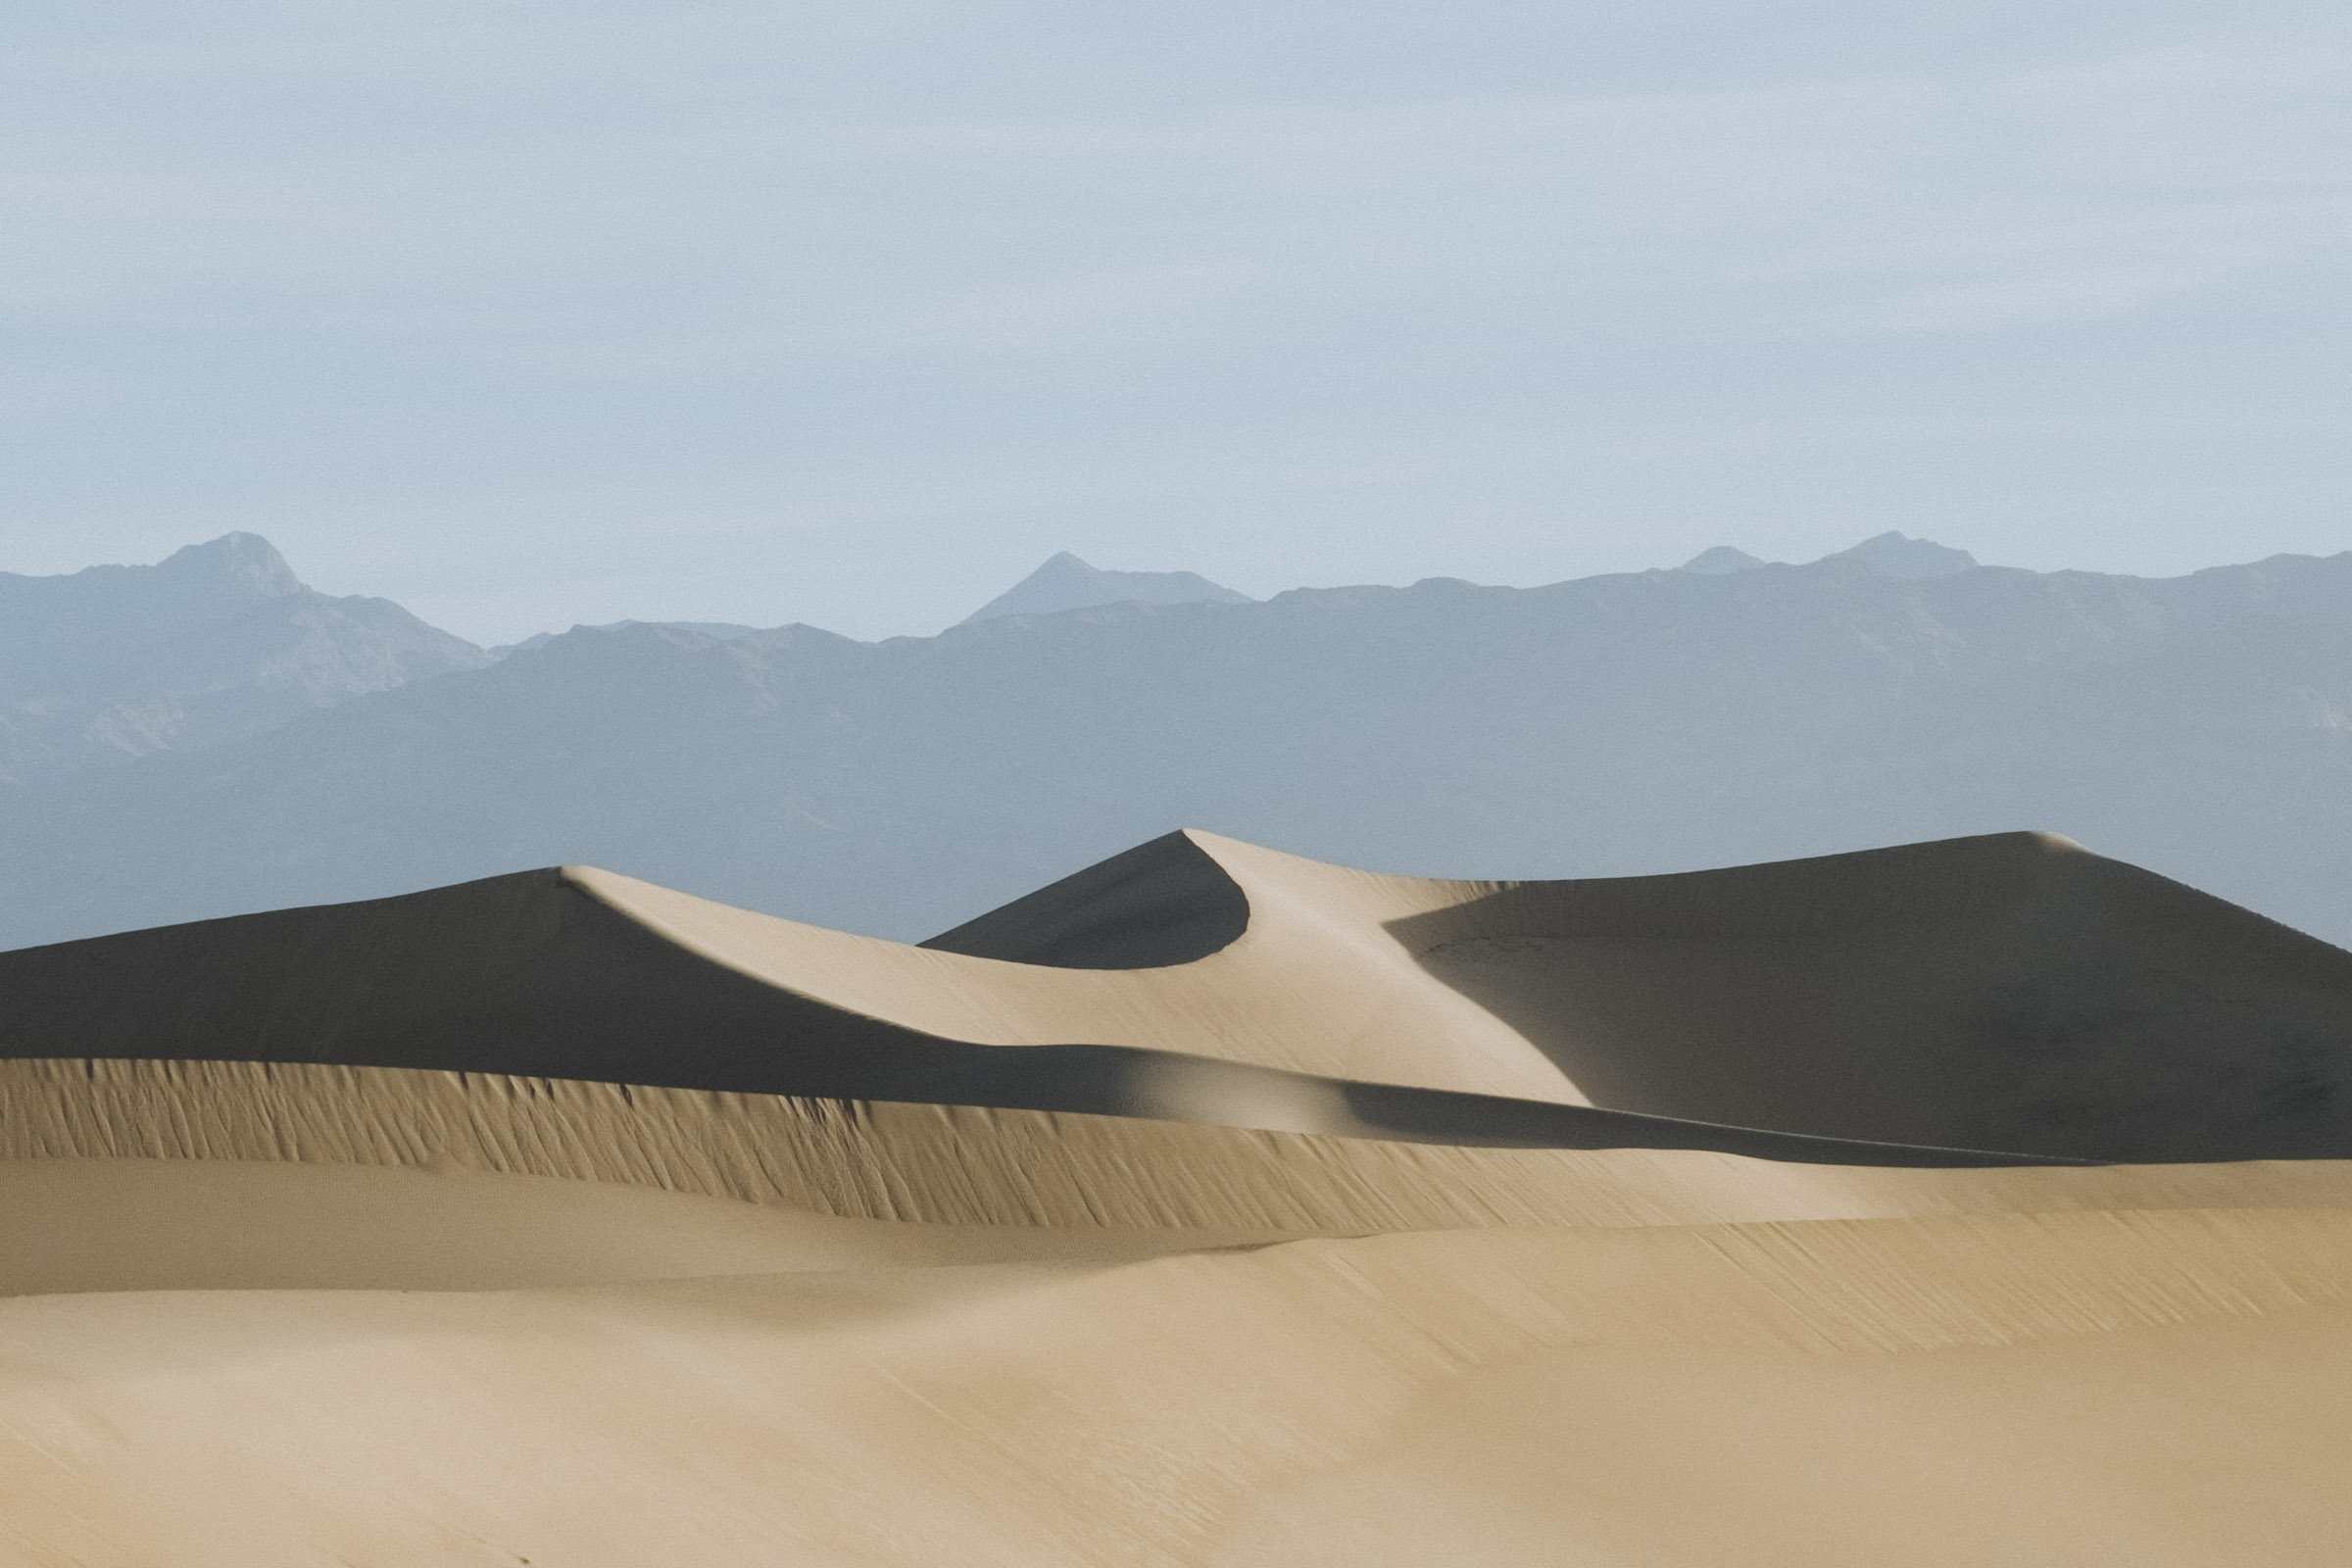 The Mesquite Dunes of Death Valley